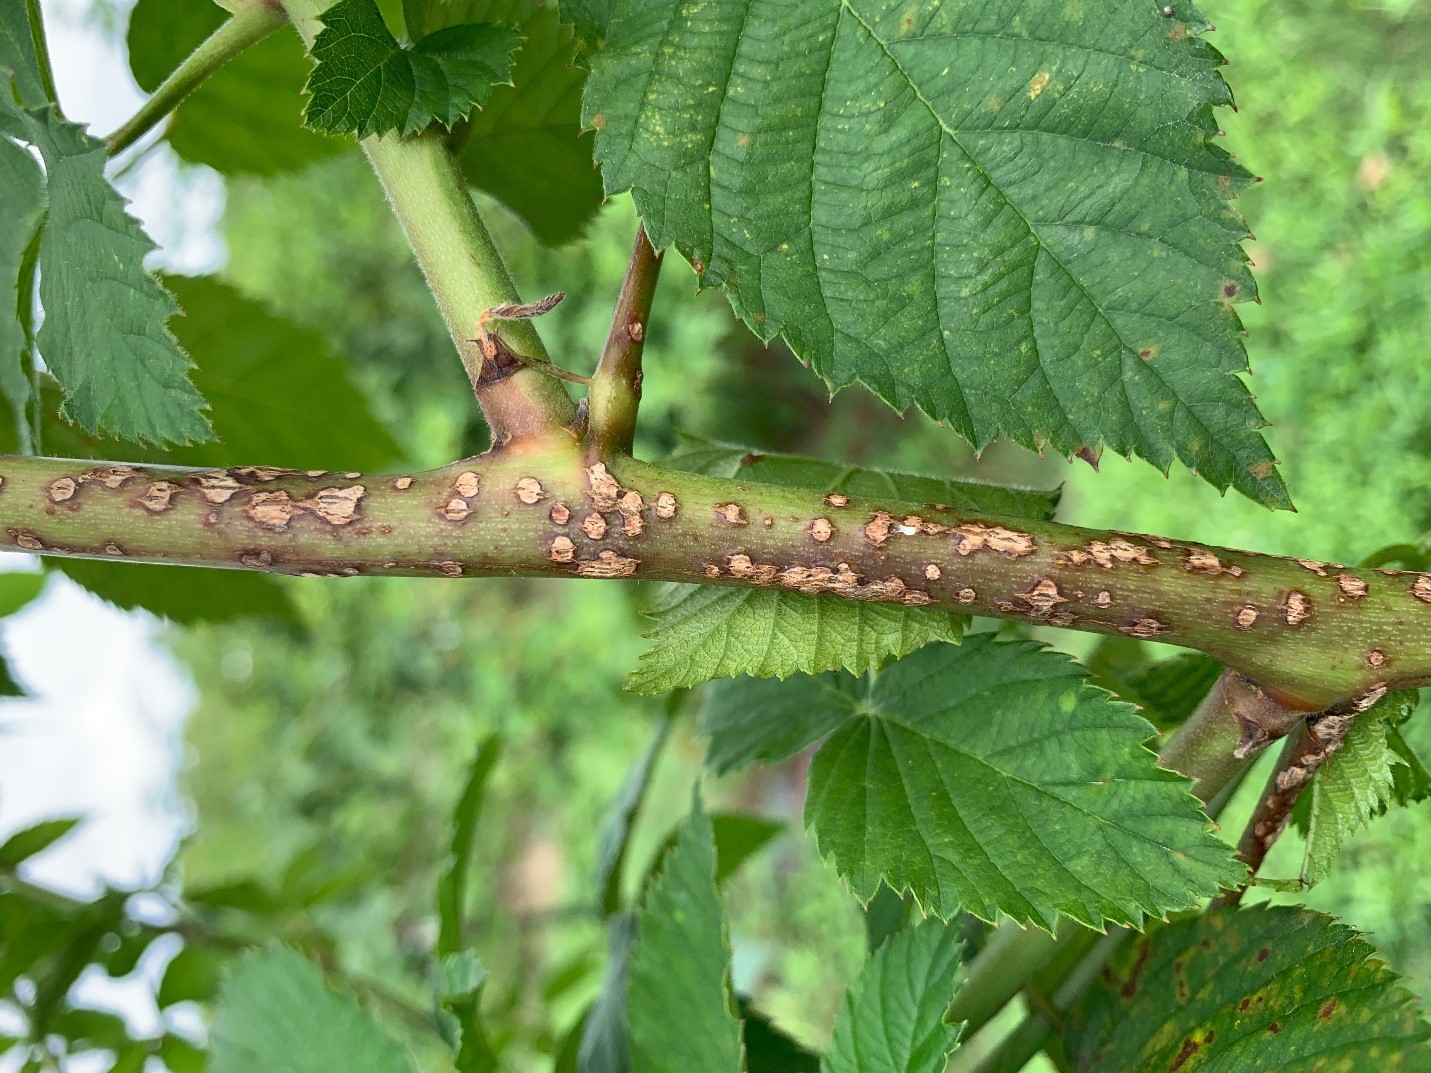 Close up of a one-year old blackberry cane with many brown lesions along the cane, a sign of anthracnose